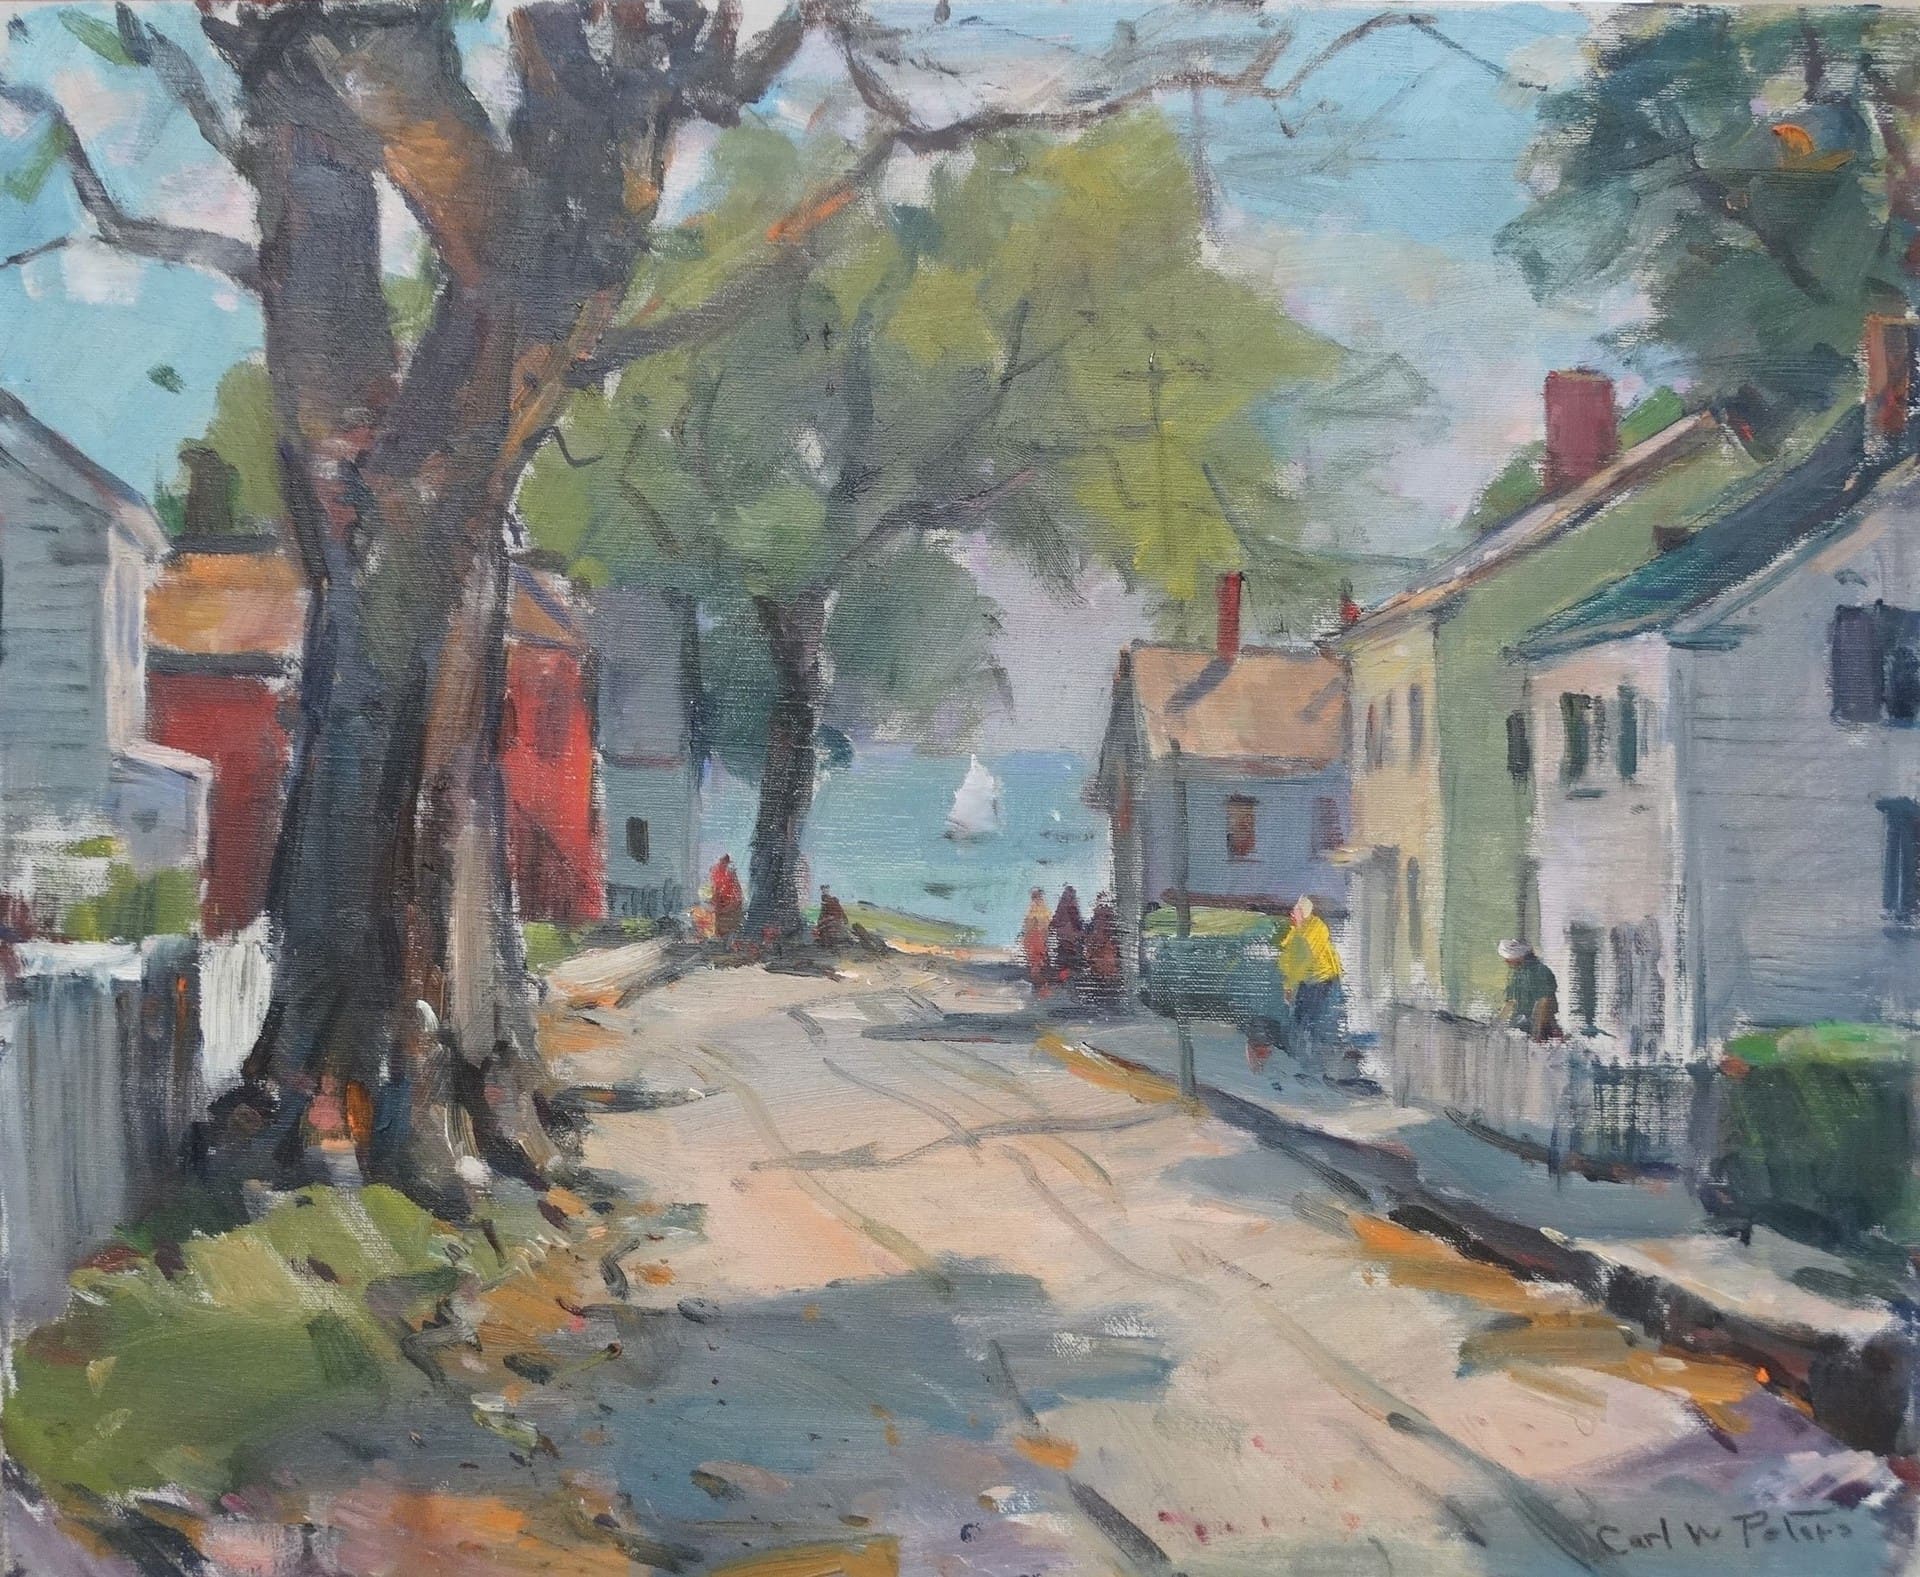 Carl Peters. Rockport Street Scene. A view looking down the road to Rockport Harbor, with a small boat at sea. Several pedestrians are also near the shore.